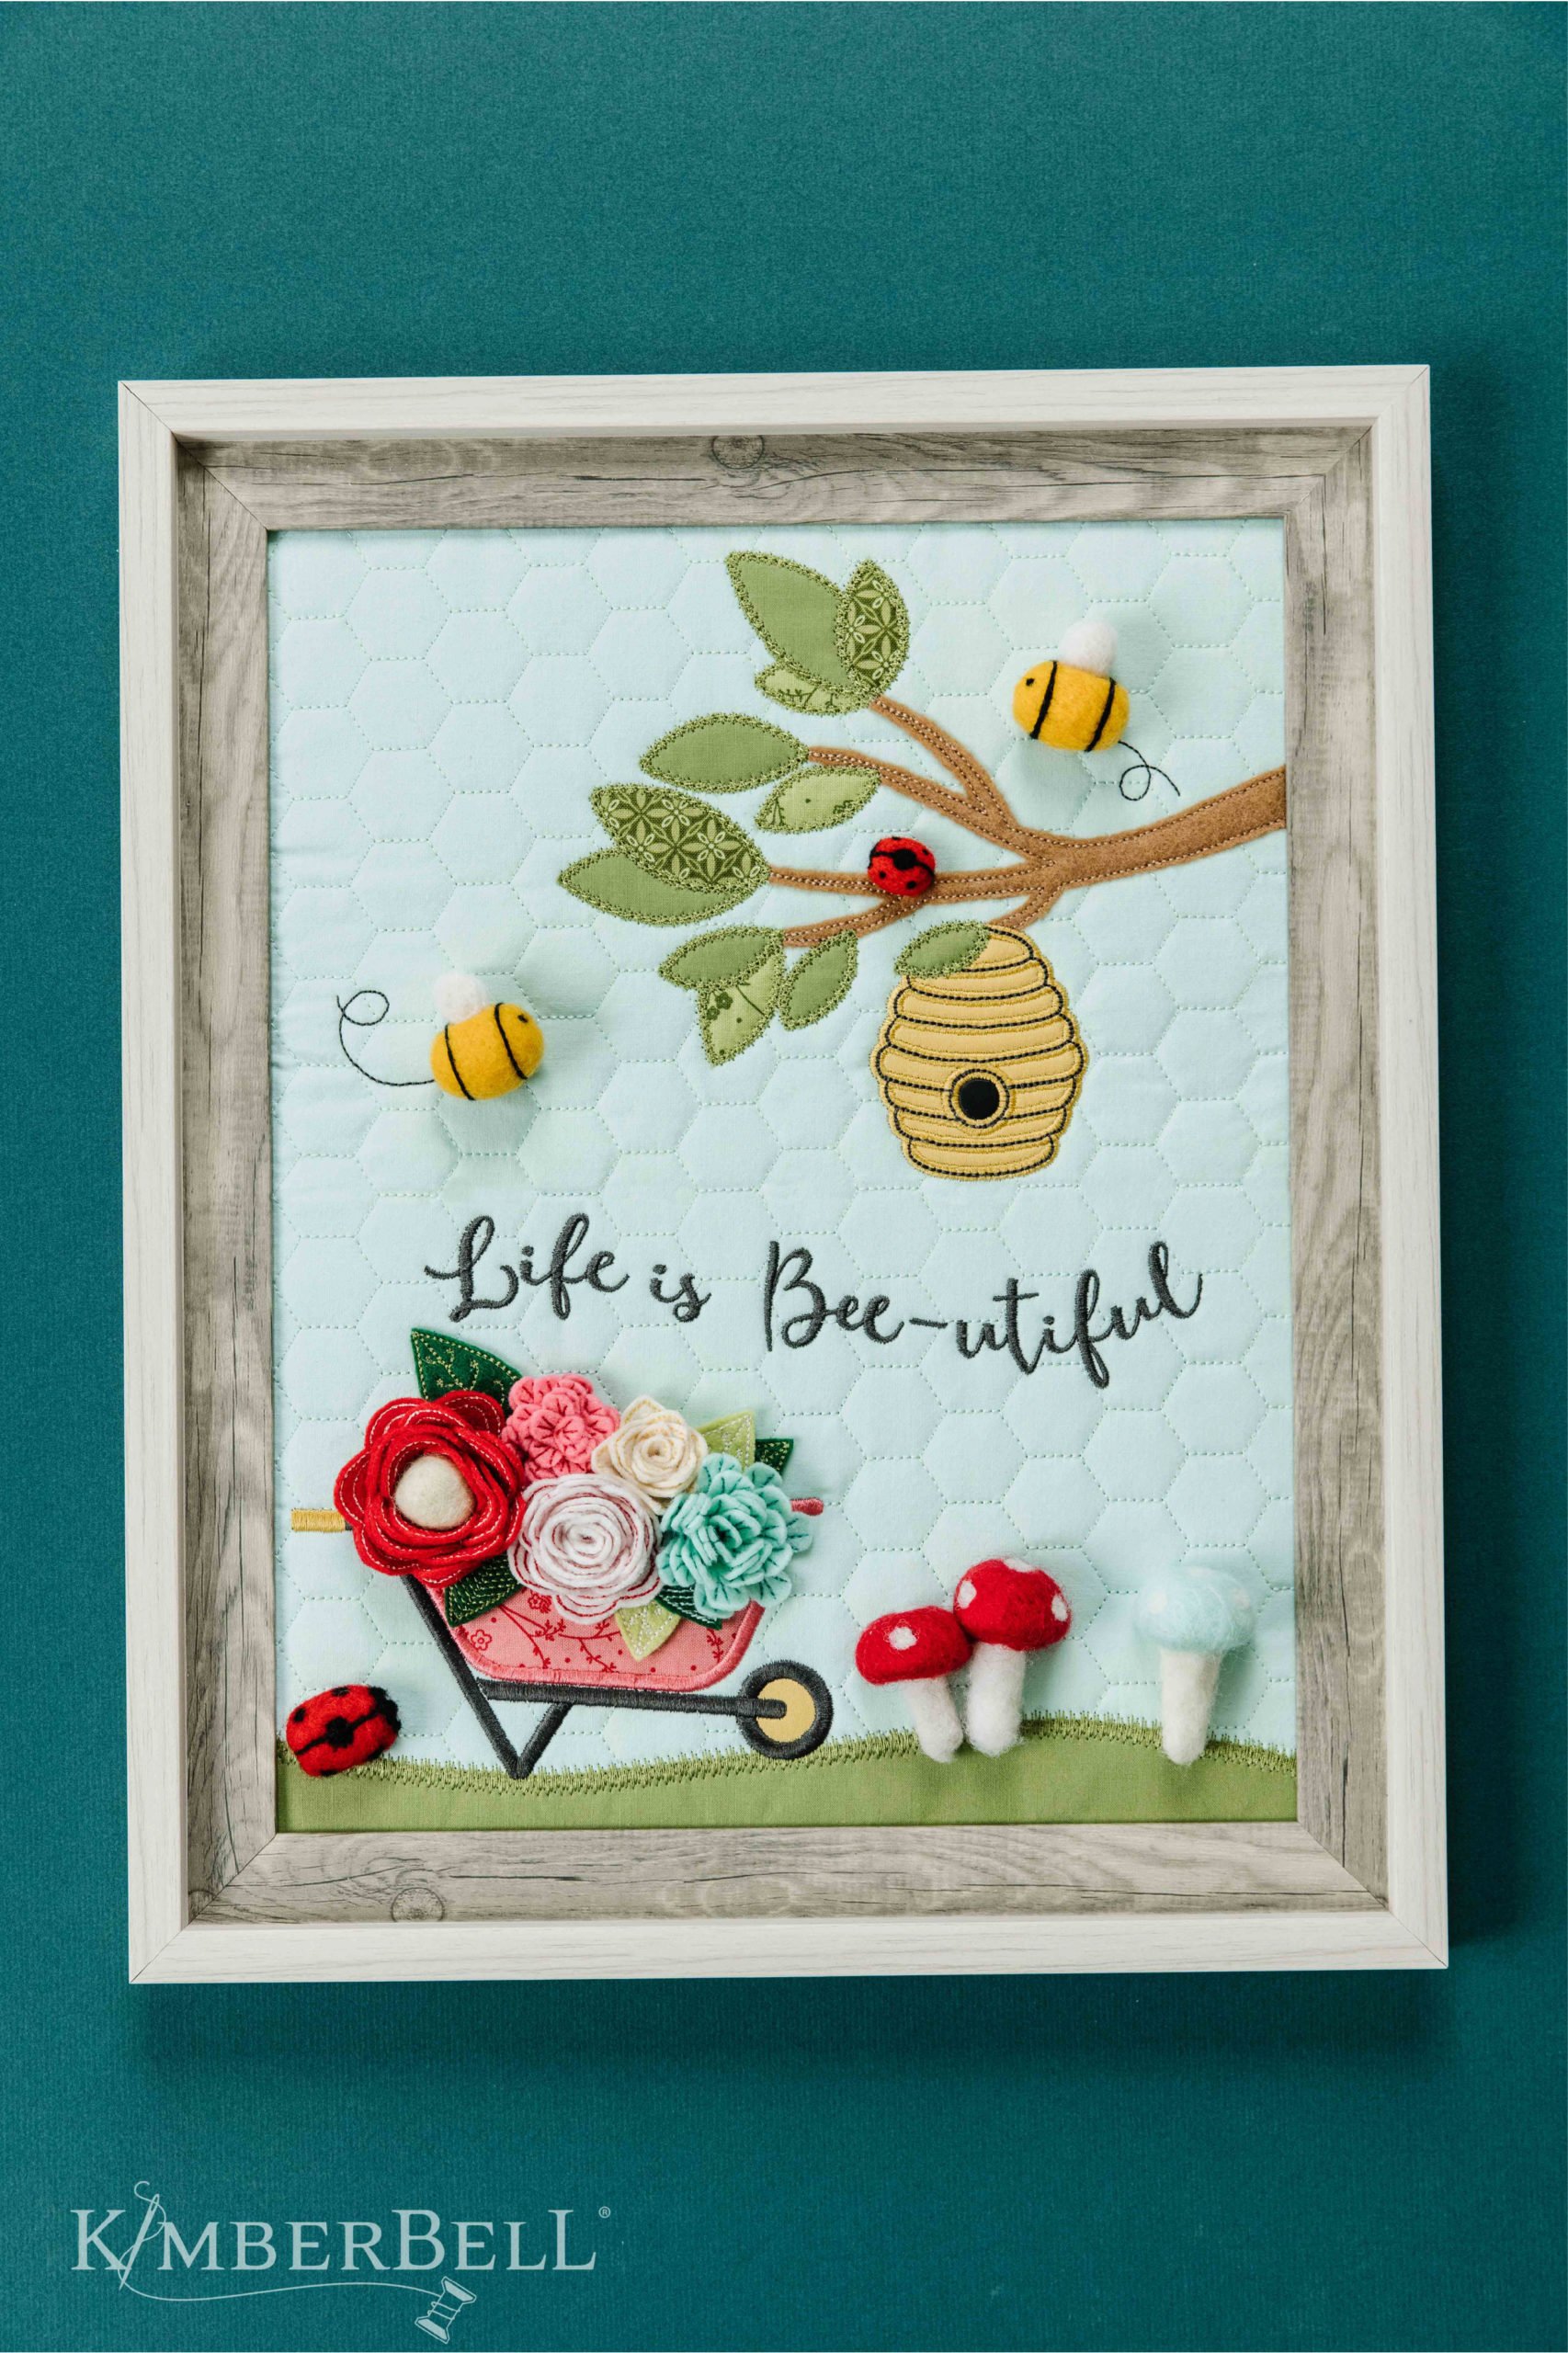 April Showers Day Two: Baby Shower Gift Ideas for Machine Embroidery,  Sewing, and Crafting!